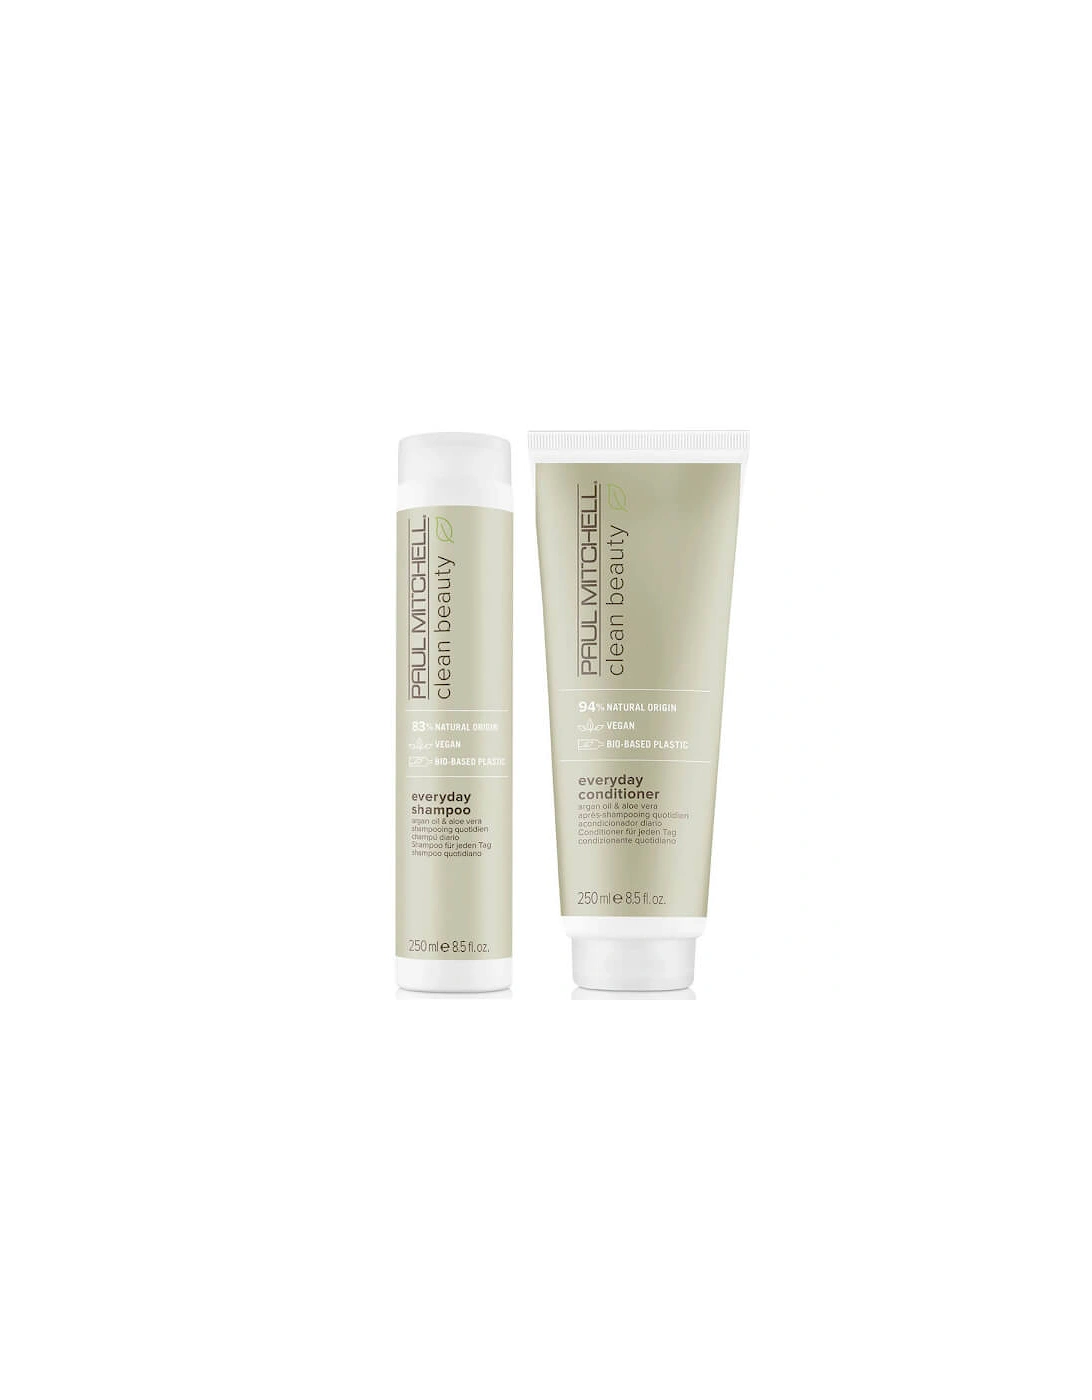 Clean Beauty Everyday Shampoo and Conditioner Set, 2 of 1